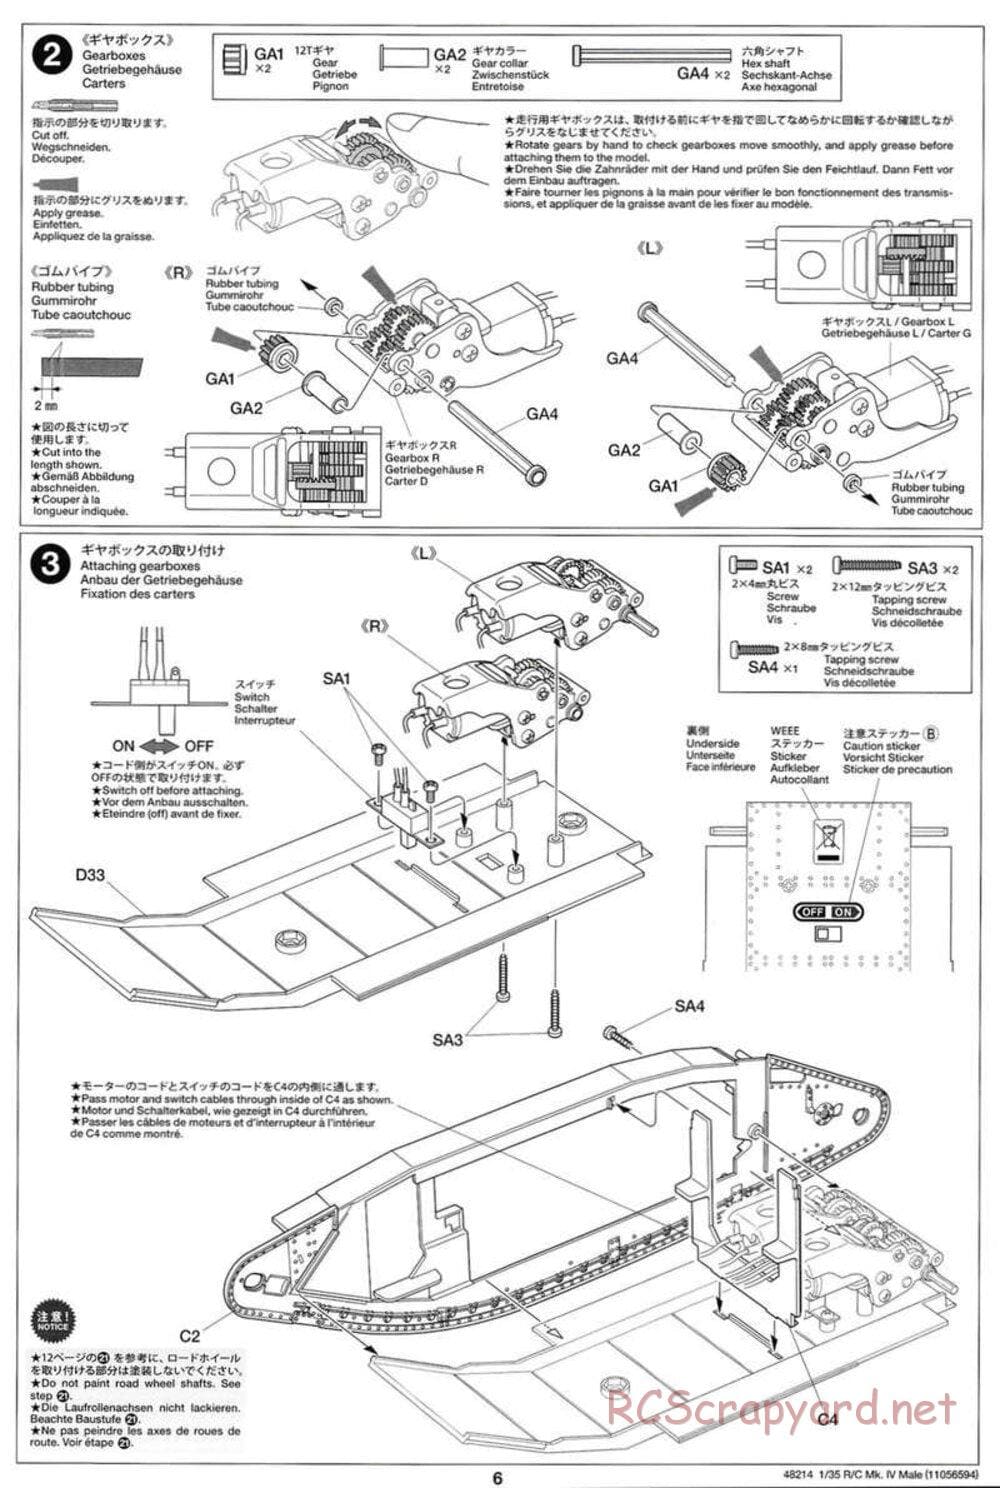 Tamiya - WWI British Tank Mark IV Male - 1/35 Scale Chassis - Manual - Page 6